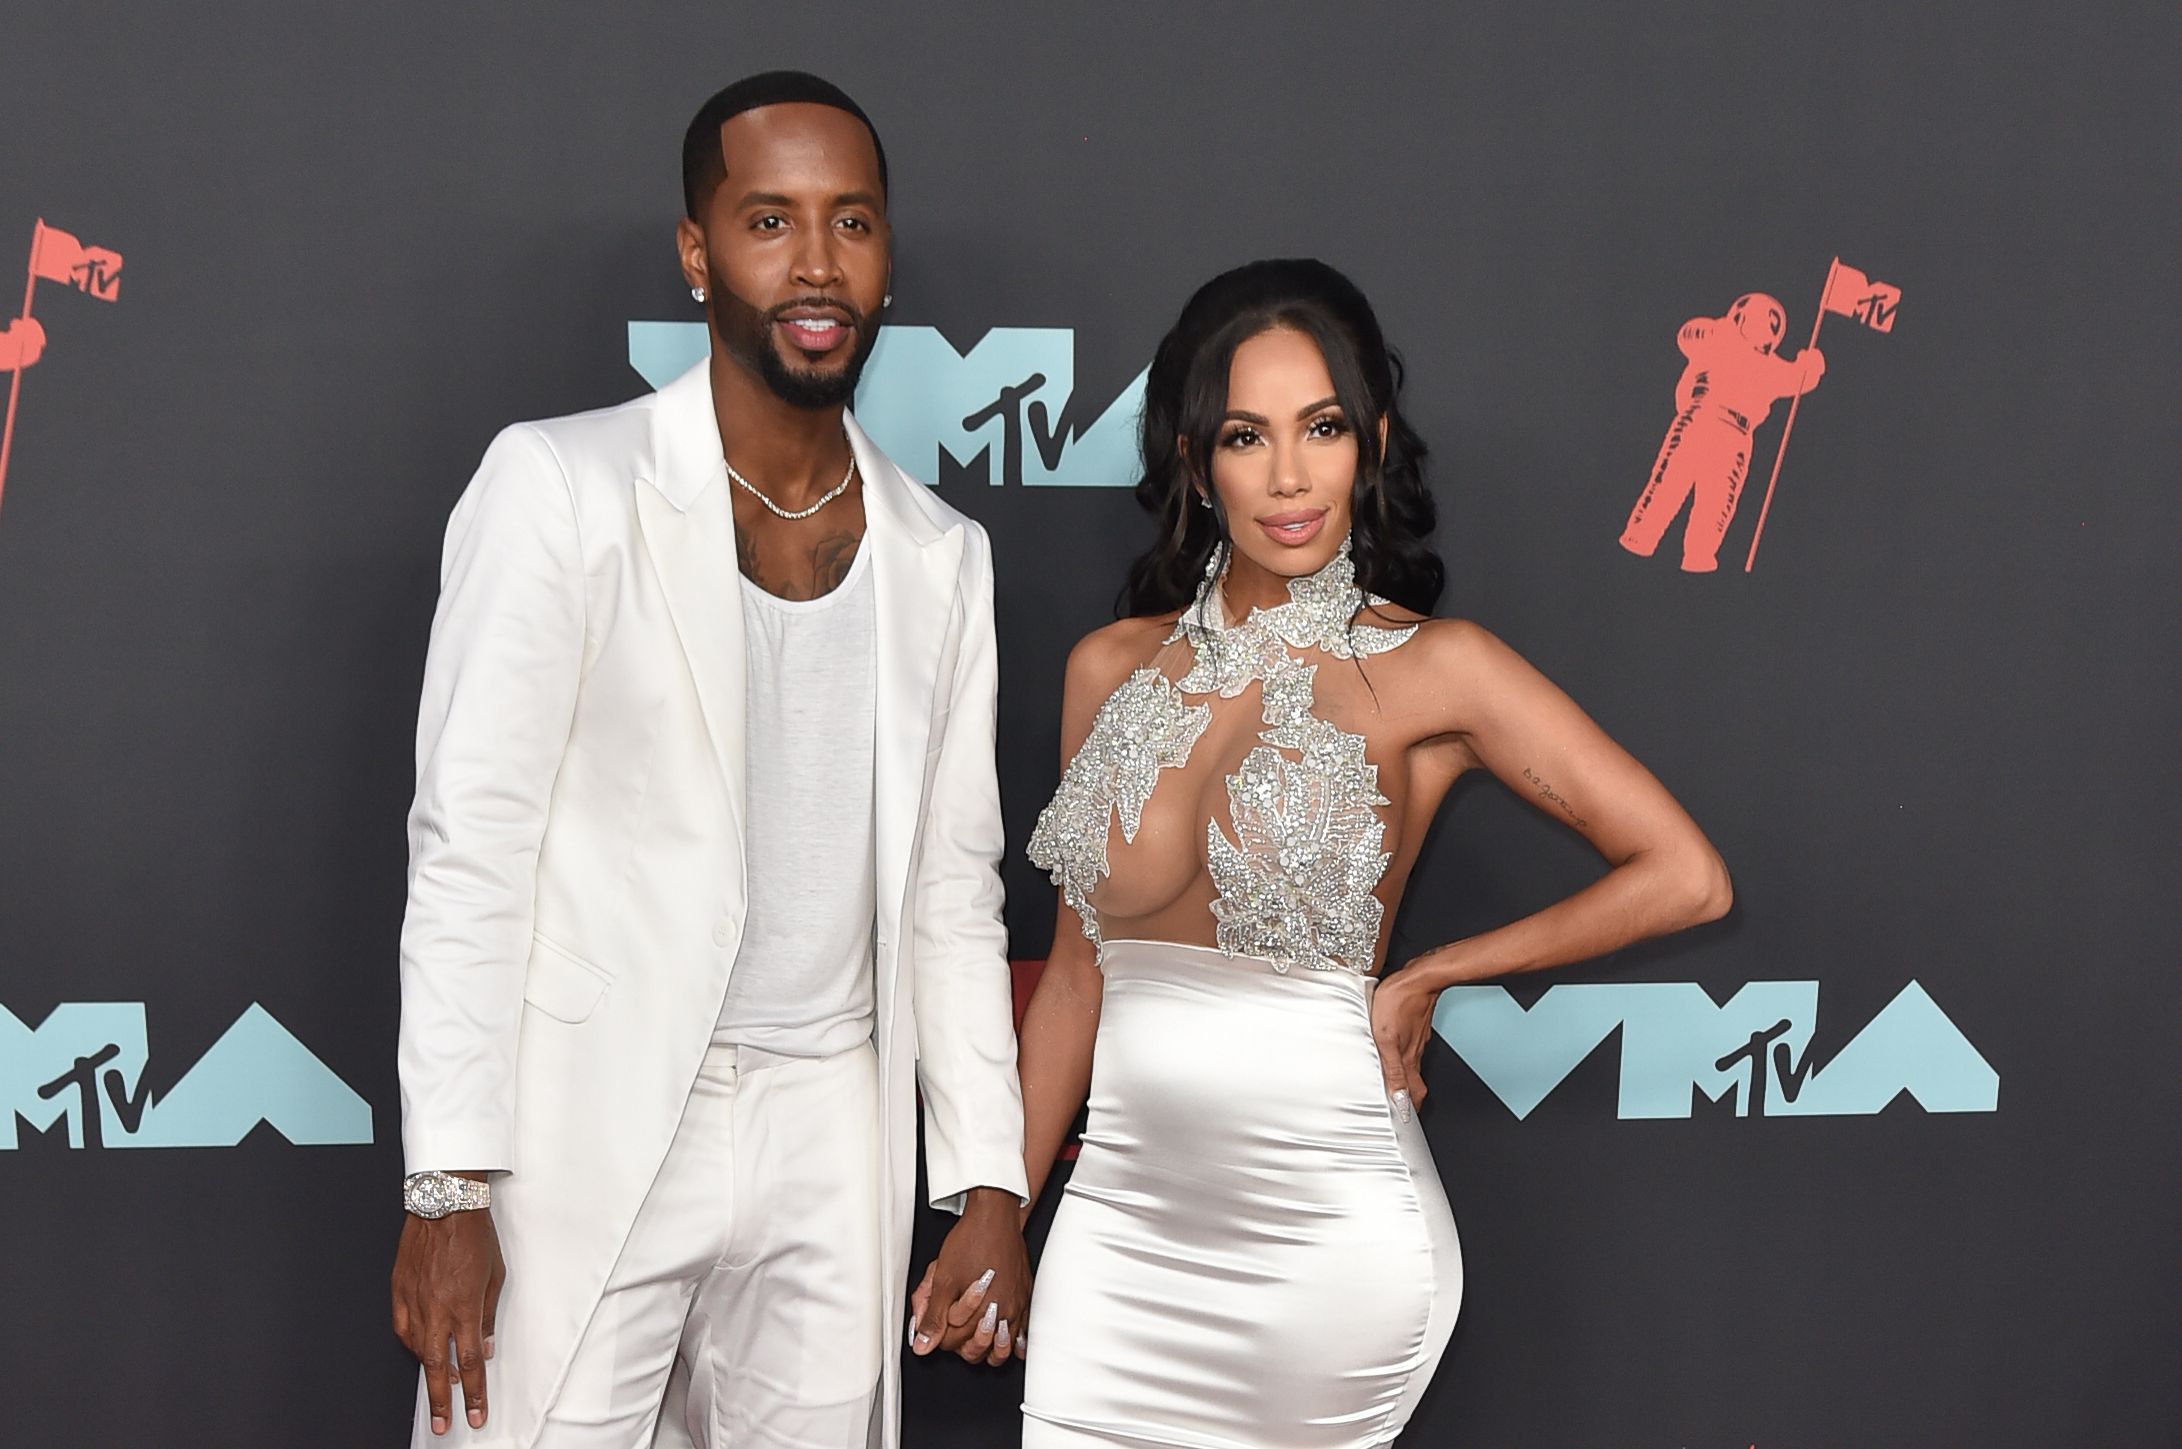 Safaree and Erica Mena at the MTV Video Music Awards on August 26, 2019 in Newark. | Photo: Getty Images